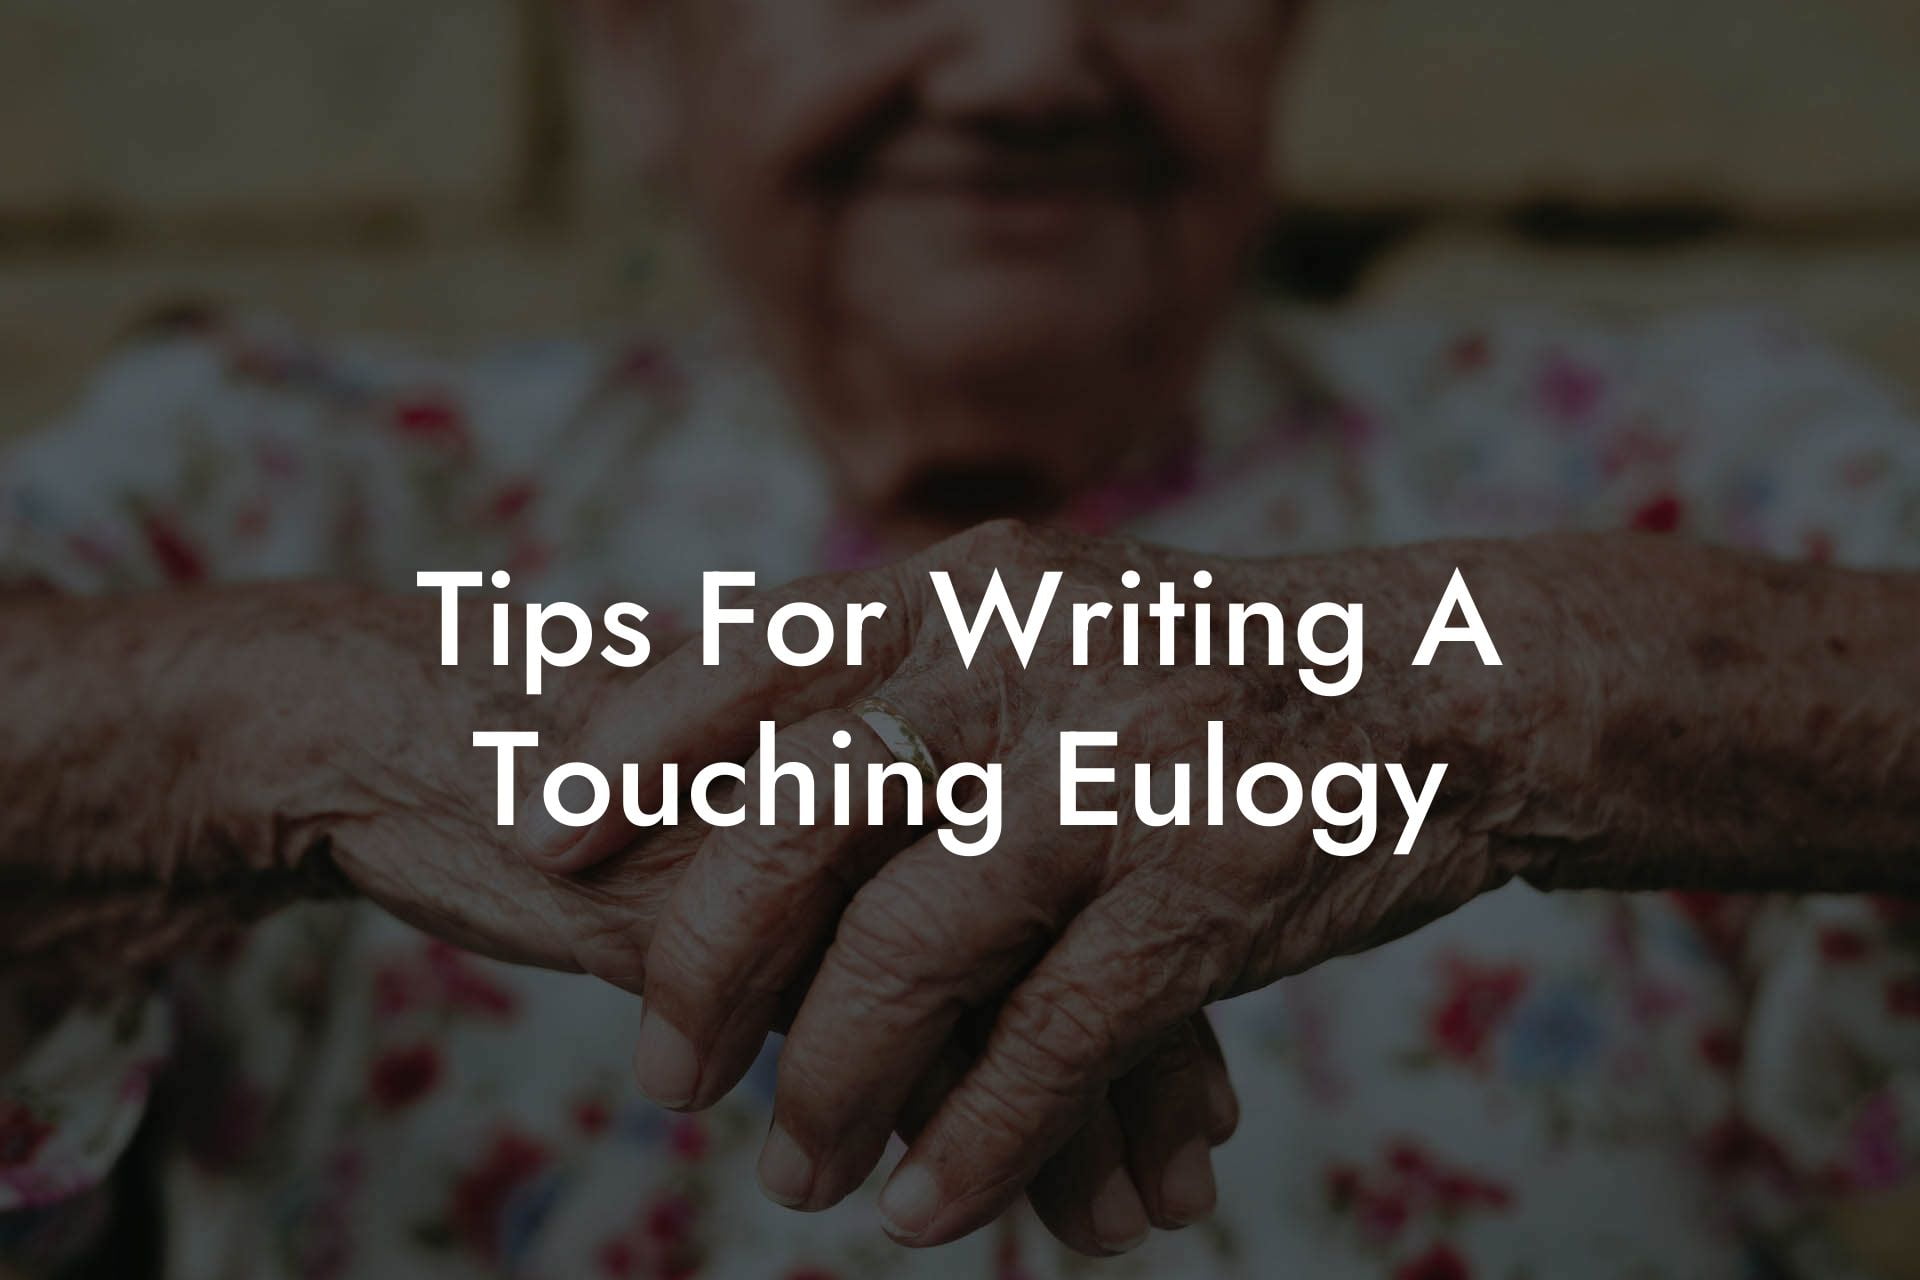 Tips For Writing A Touching Eulogy